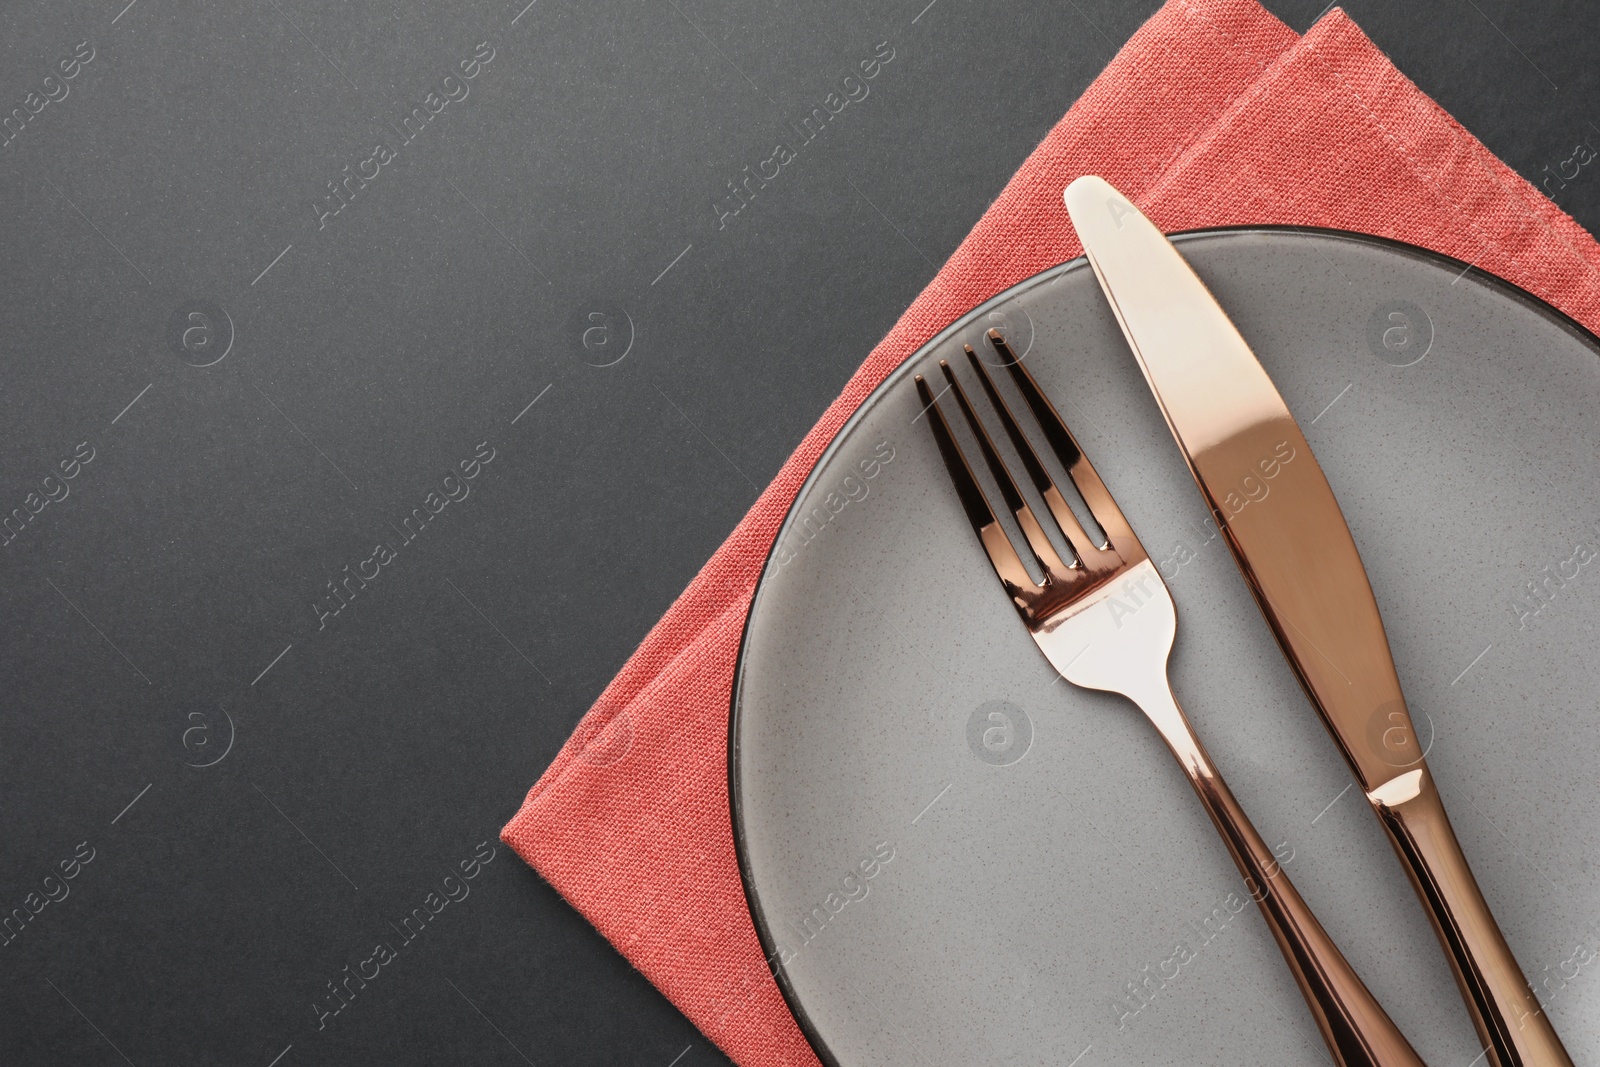 Photo of Clean plate, cutlery and napkin on grey table, top view. Space for text